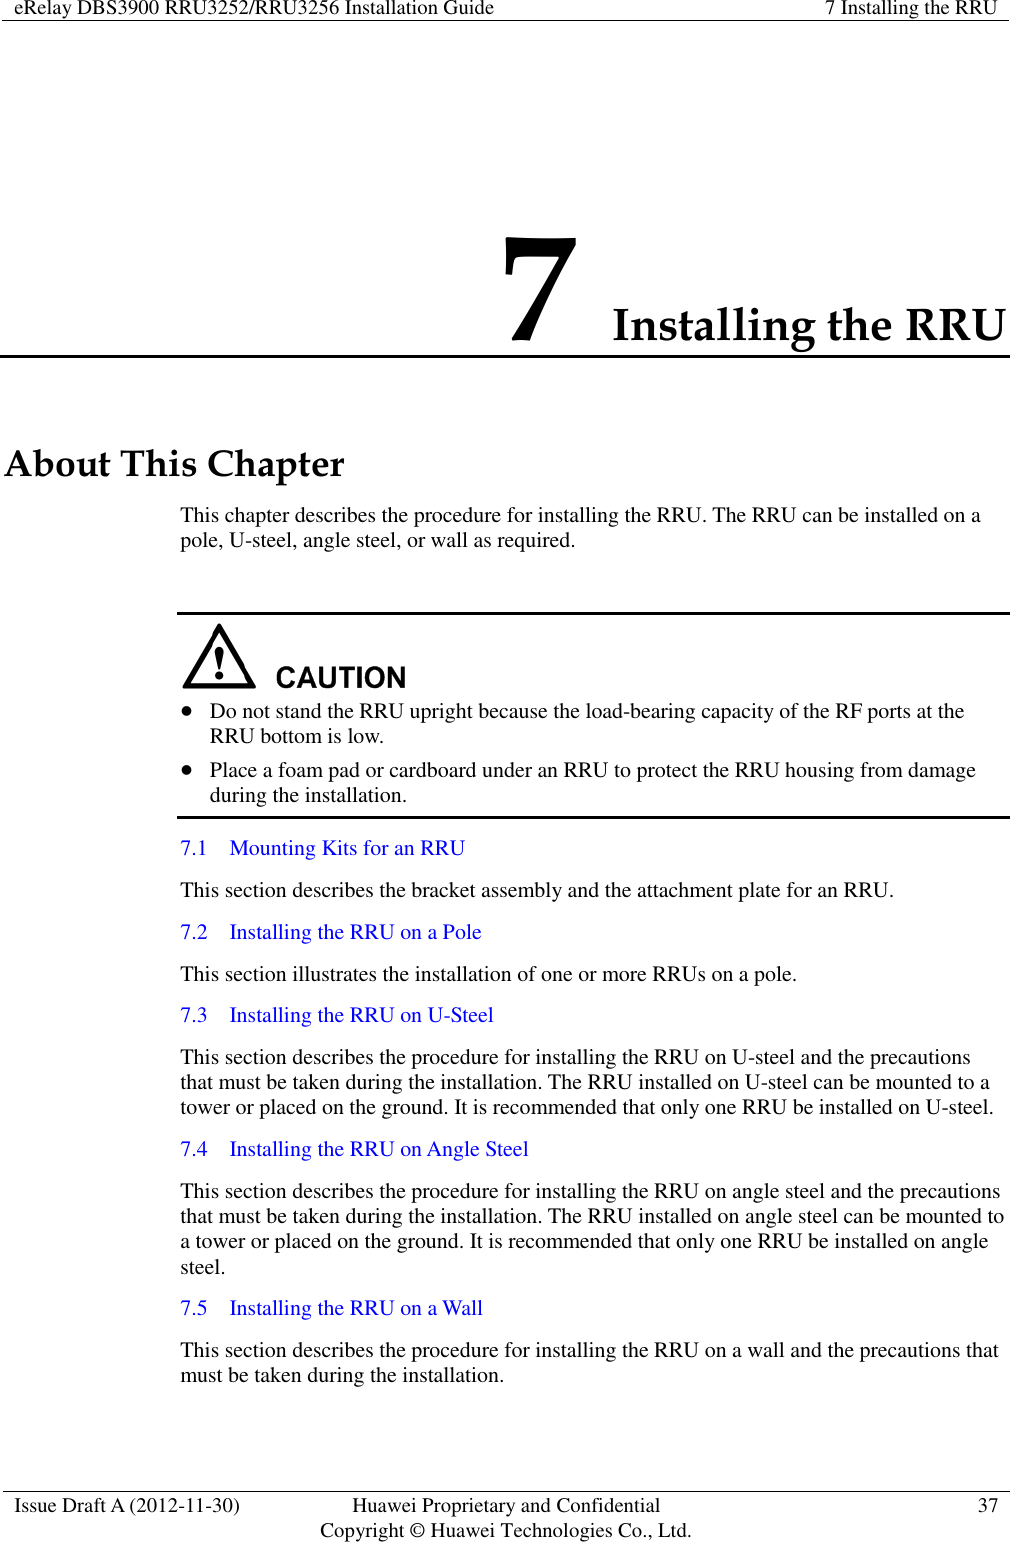 eRelay DBS3900 RRU3252/RRU3256 Installation Guide 7 Installing the RRU  Issue Draft A (2012-11-30) Huawei Proprietary and Confidential                                     Copyright © Huawei Technologies Co., Ltd. 37  7 Installing the RRU About This Chapter This chapter describes the procedure for installing the RRU. The RRU can be installed on a pole, U-steel, angle steel, or wall as required.      Do not stand the RRU upright because the load-bearing capacity of the RF ports at the RRU bottom is low.    Place a foam pad or cardboard under an RRU to protect the RRU housing from damage during the installation. 7.1    Mounting Kits for an RRU This section describes the bracket assembly and the attachment plate for an RRU. 7.2    Installing the RRU on a Pole This section illustrates the installation of one or more RRUs on a pole. 7.3    Installing the RRU on U-Steel This section describes the procedure for installing the RRU on U-steel and the precautions that must be taken during the installation. The RRU installed on U-steel can be mounted to a tower or placed on the ground. It is recommended that only one RRU be installed on U-steel.   7.4    Installing the RRU on Angle Steel This section describes the procedure for installing the RRU on angle steel and the precautions that must be taken during the installation. The RRU installed on angle steel can be mounted to a tower or placed on the ground. It is recommended that only one RRU be installed on angle steel.   7.5    Installing the RRU on a Wall This section describes the procedure for installing the RRU on a wall and the precautions that must be taken during the installation. 